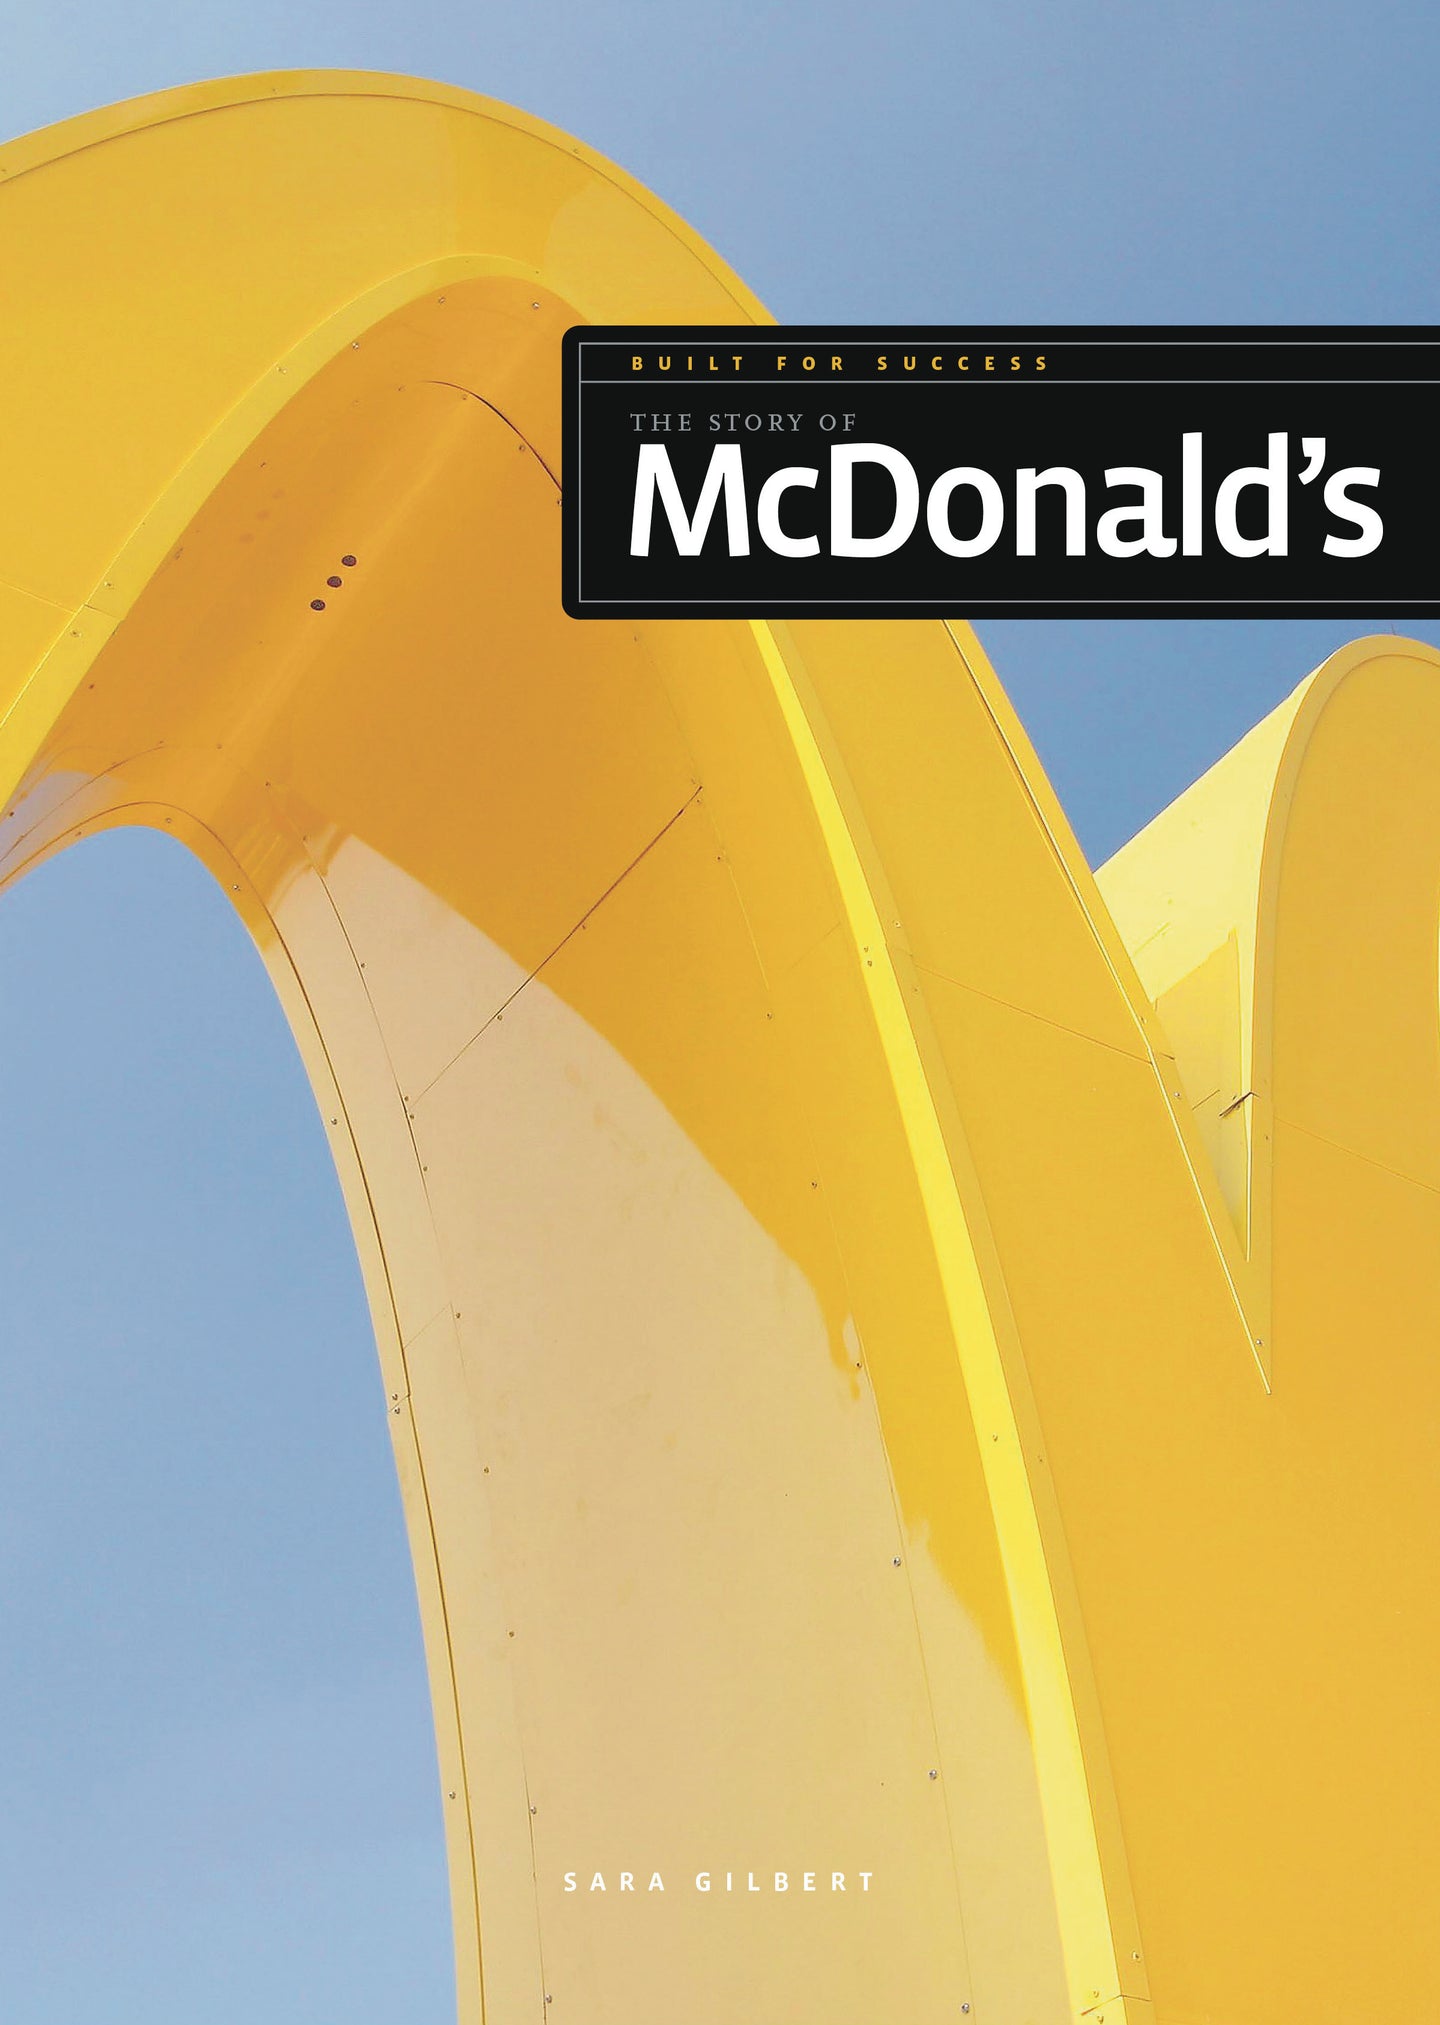 Built for Success: The Story of McDonald's